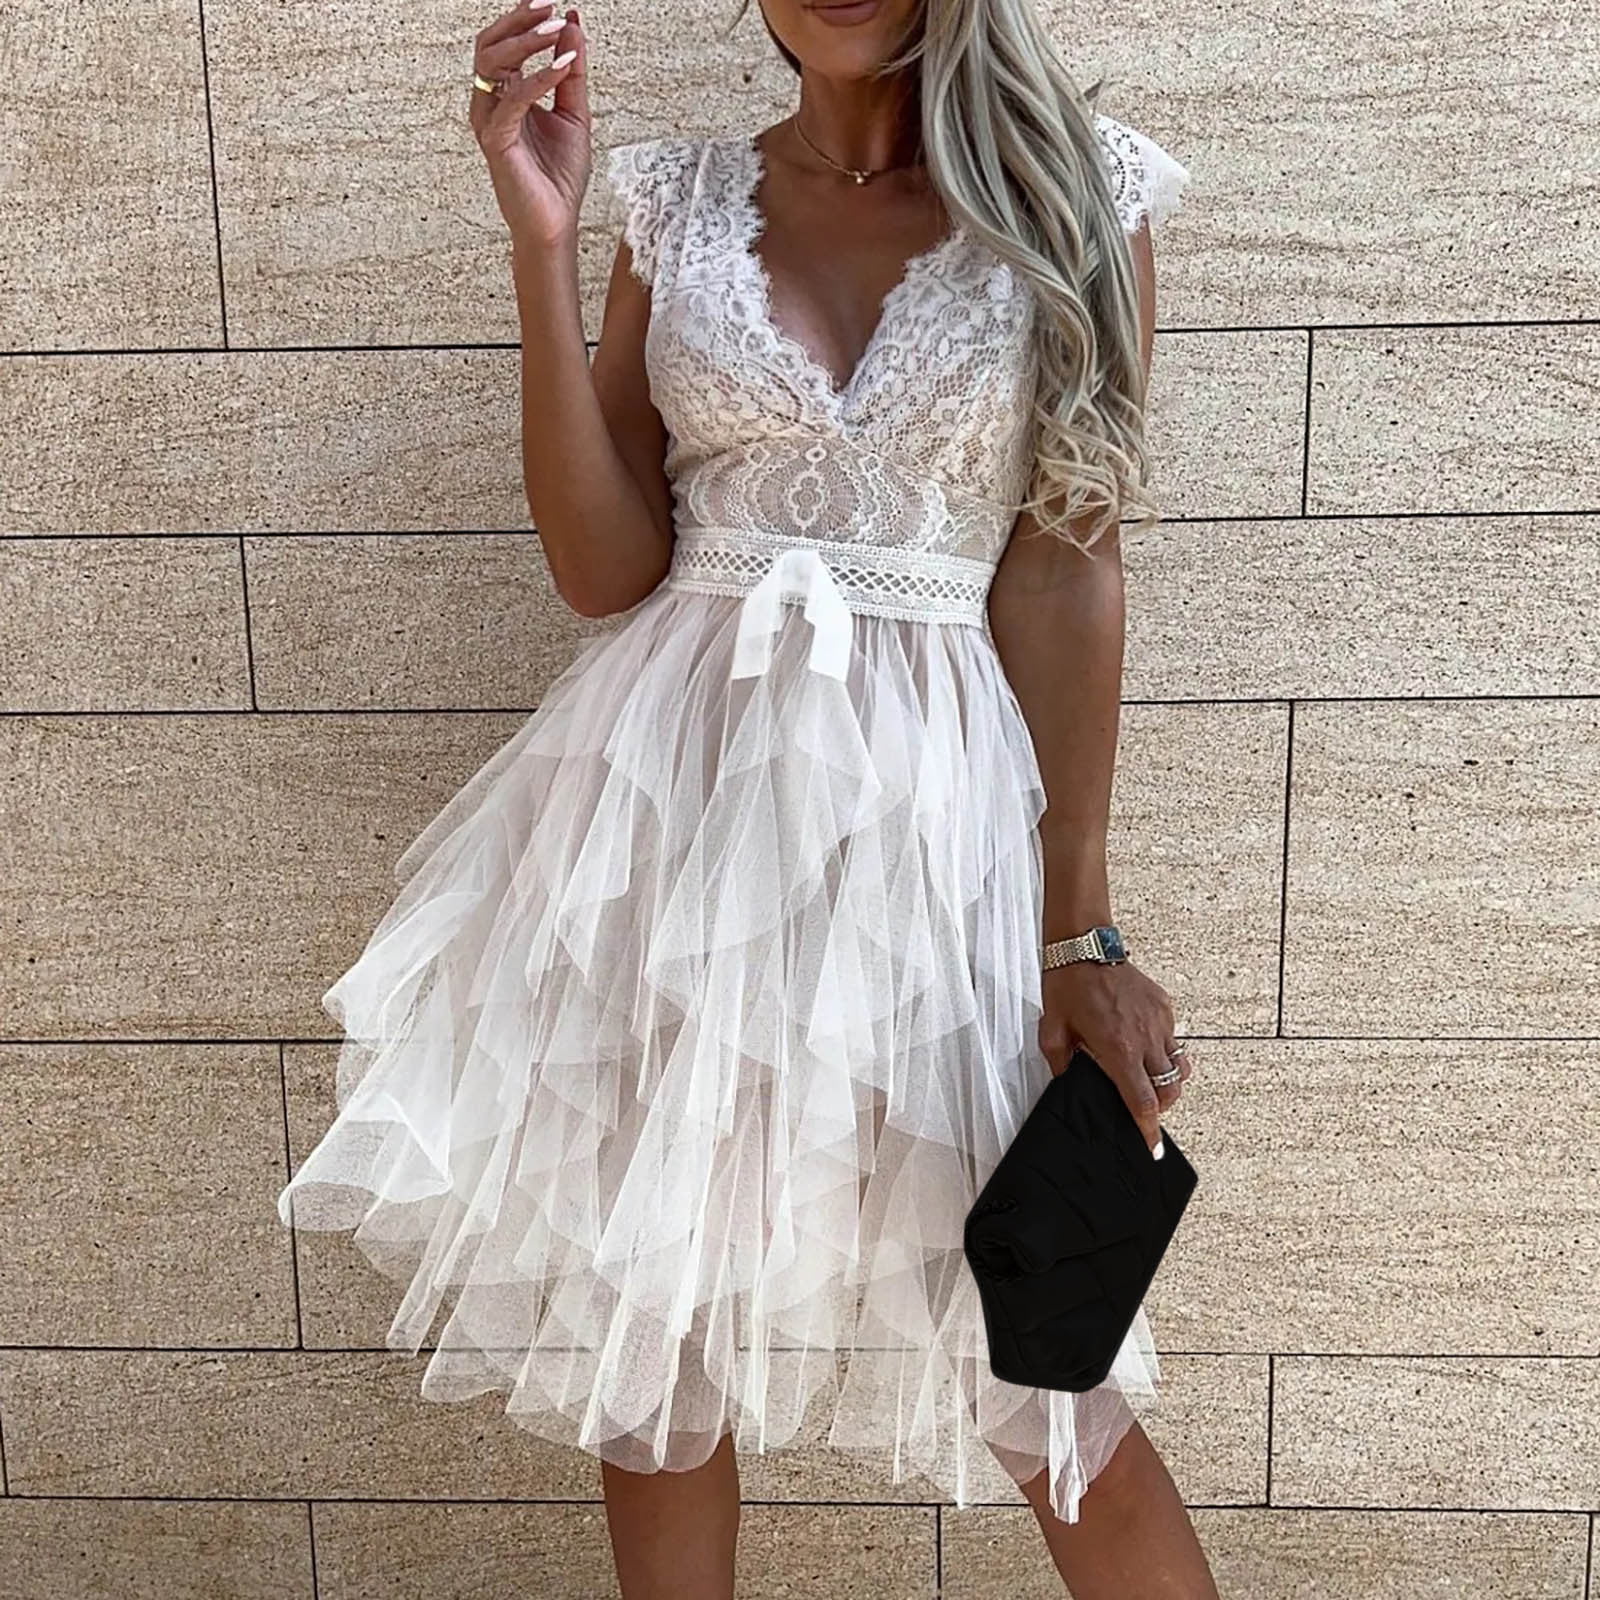 lace dresses for women’s